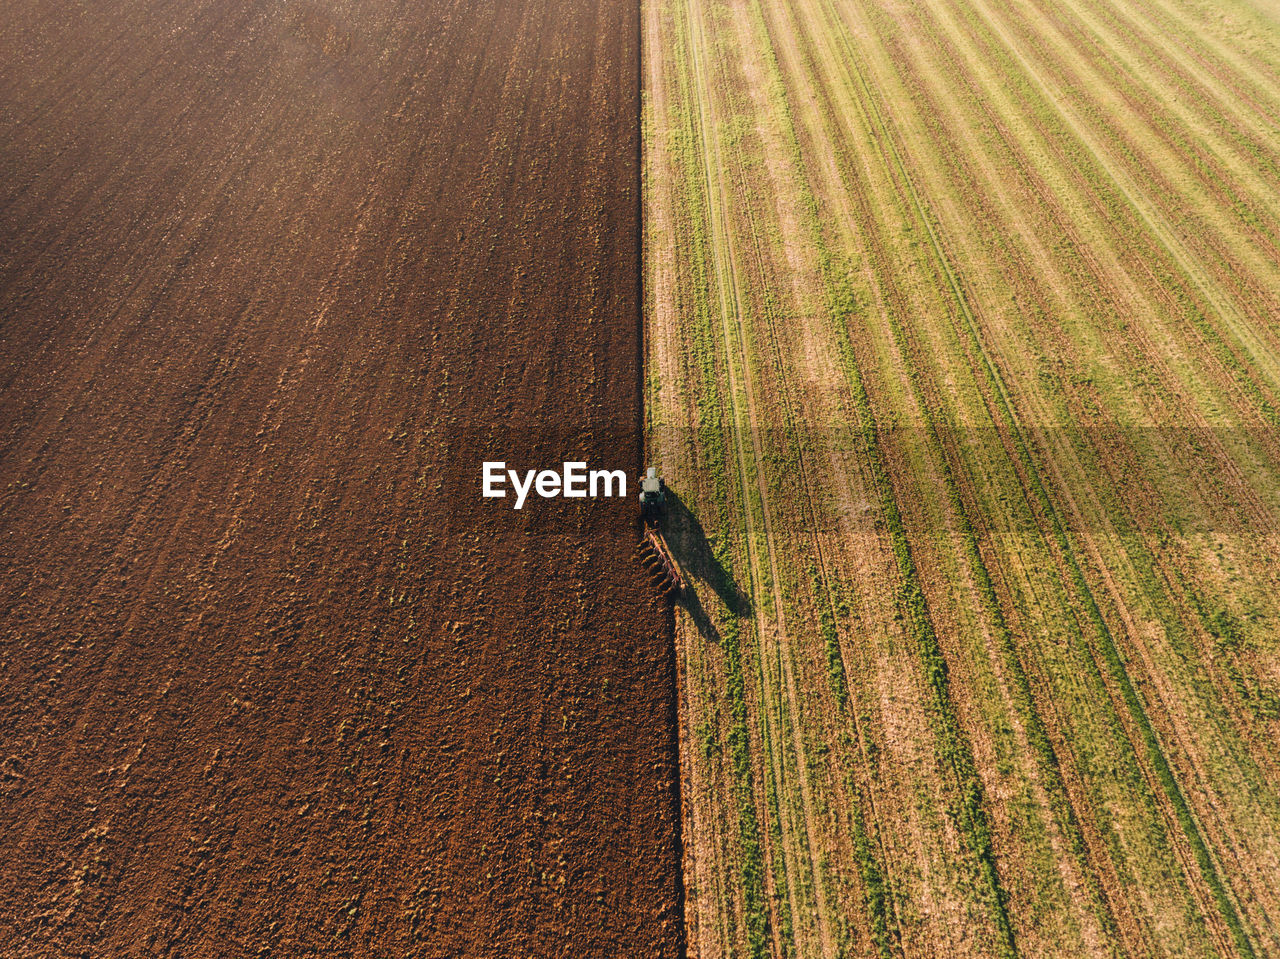 High angle view of corn field with harvester